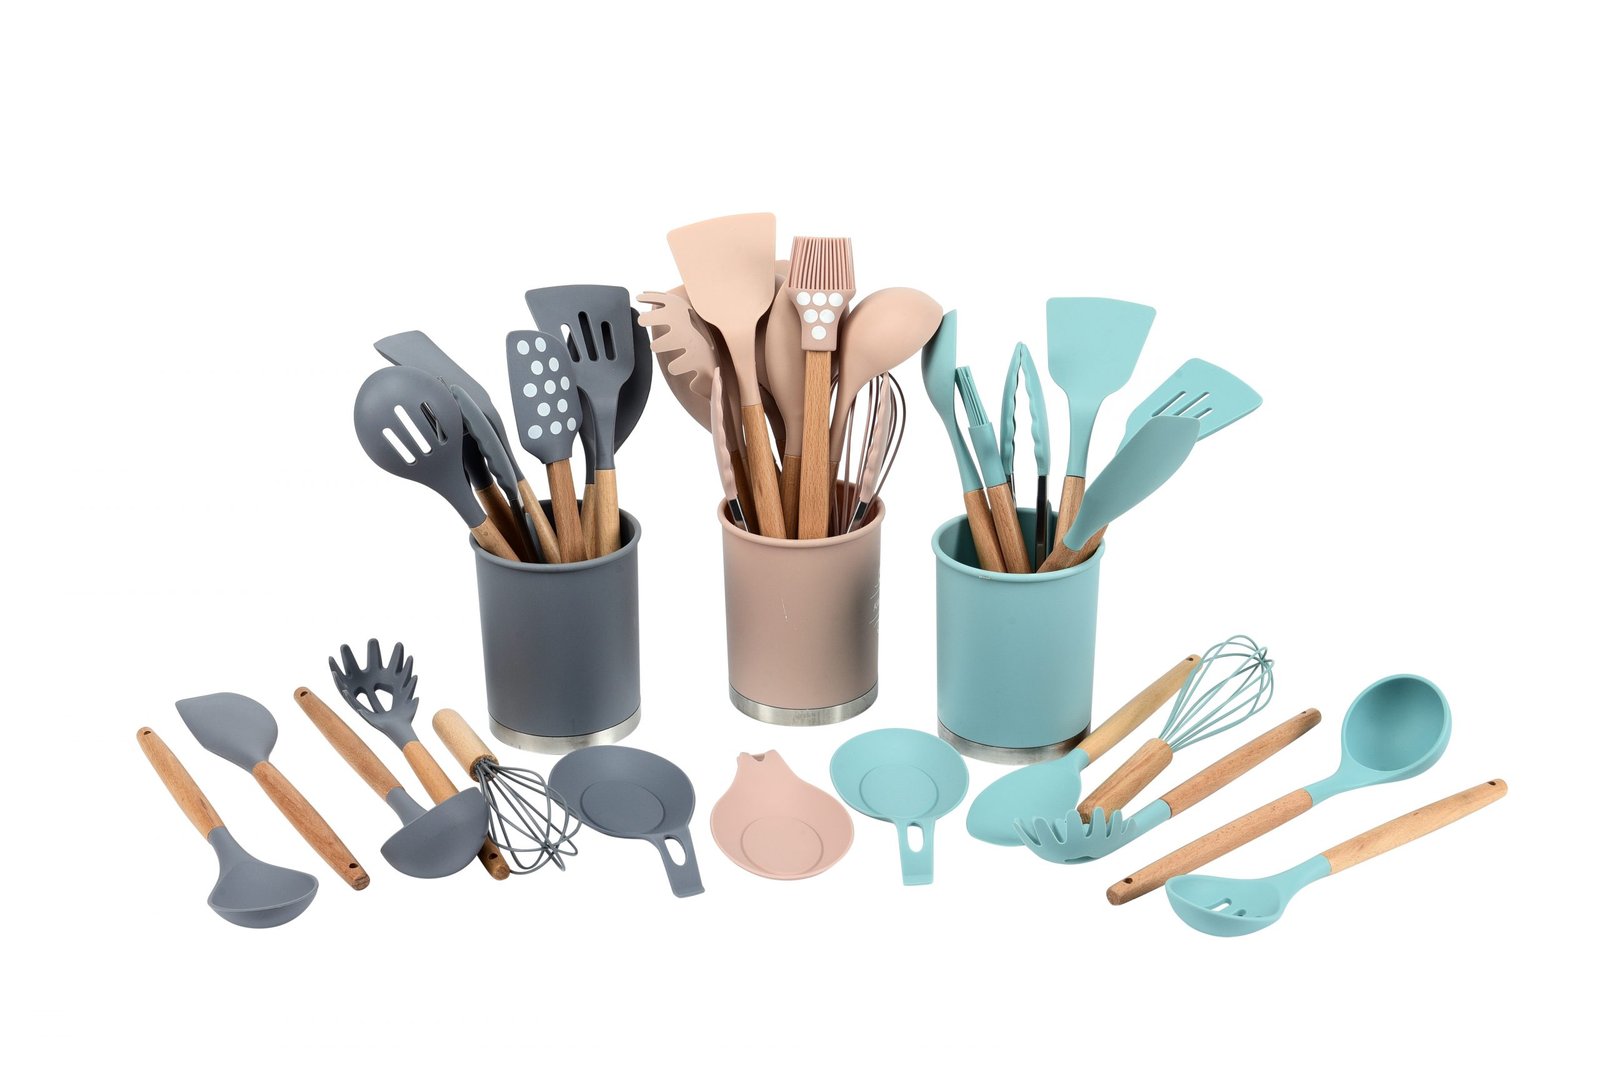 https://www.wetopsilicone.com/wp-content/uploads/2021/04/Wholesale-Silicone-Cooking-Utensils-Set-Heat-Resistant-1-scaled.jpg